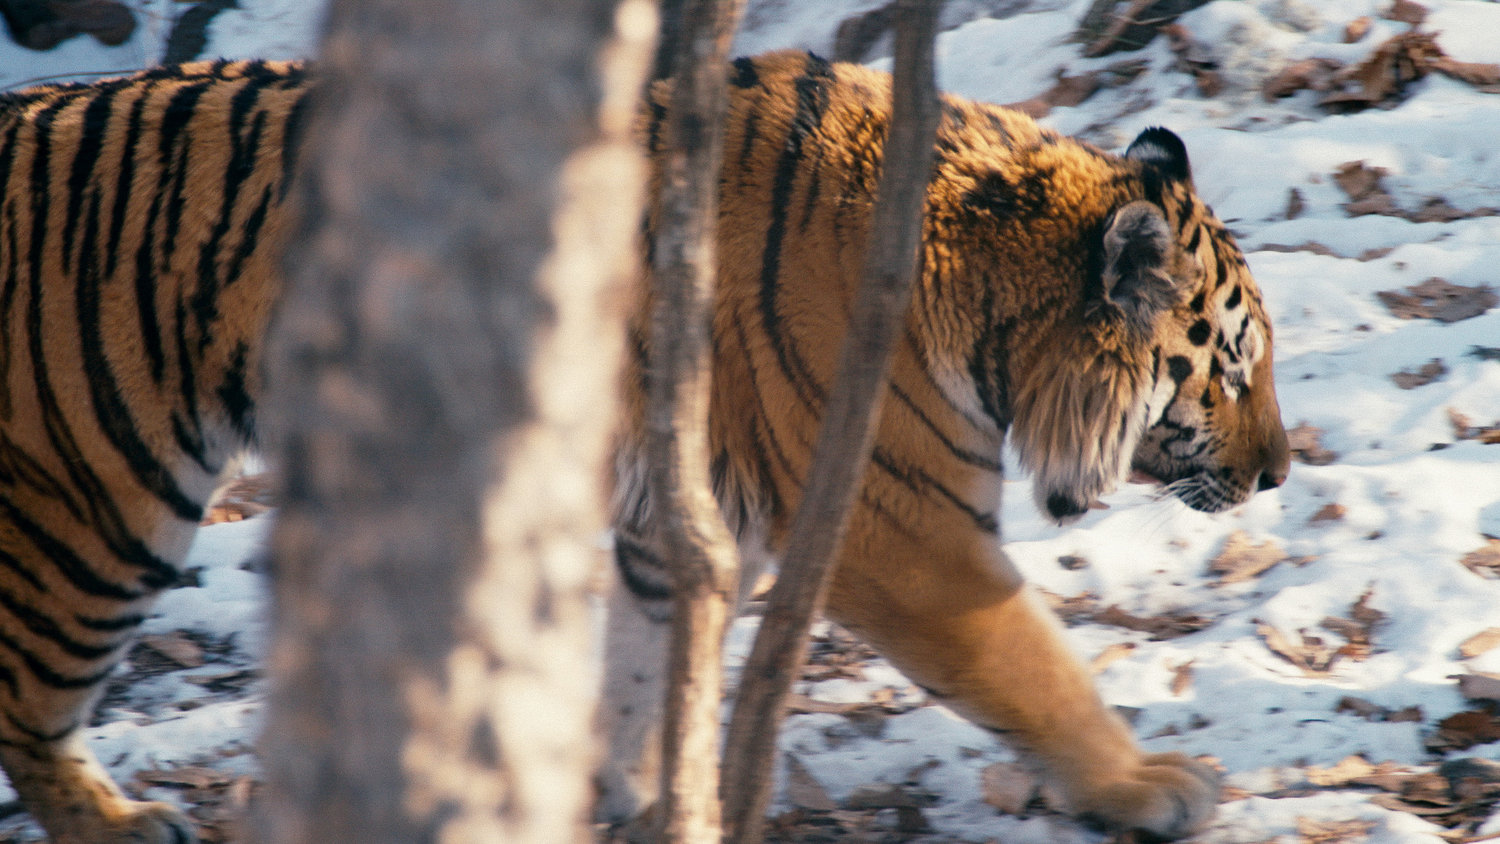 From Ross Kauffman's "Tigerland," which airs March 30 on Discovery Channel. Courtesy of Discovery Channel